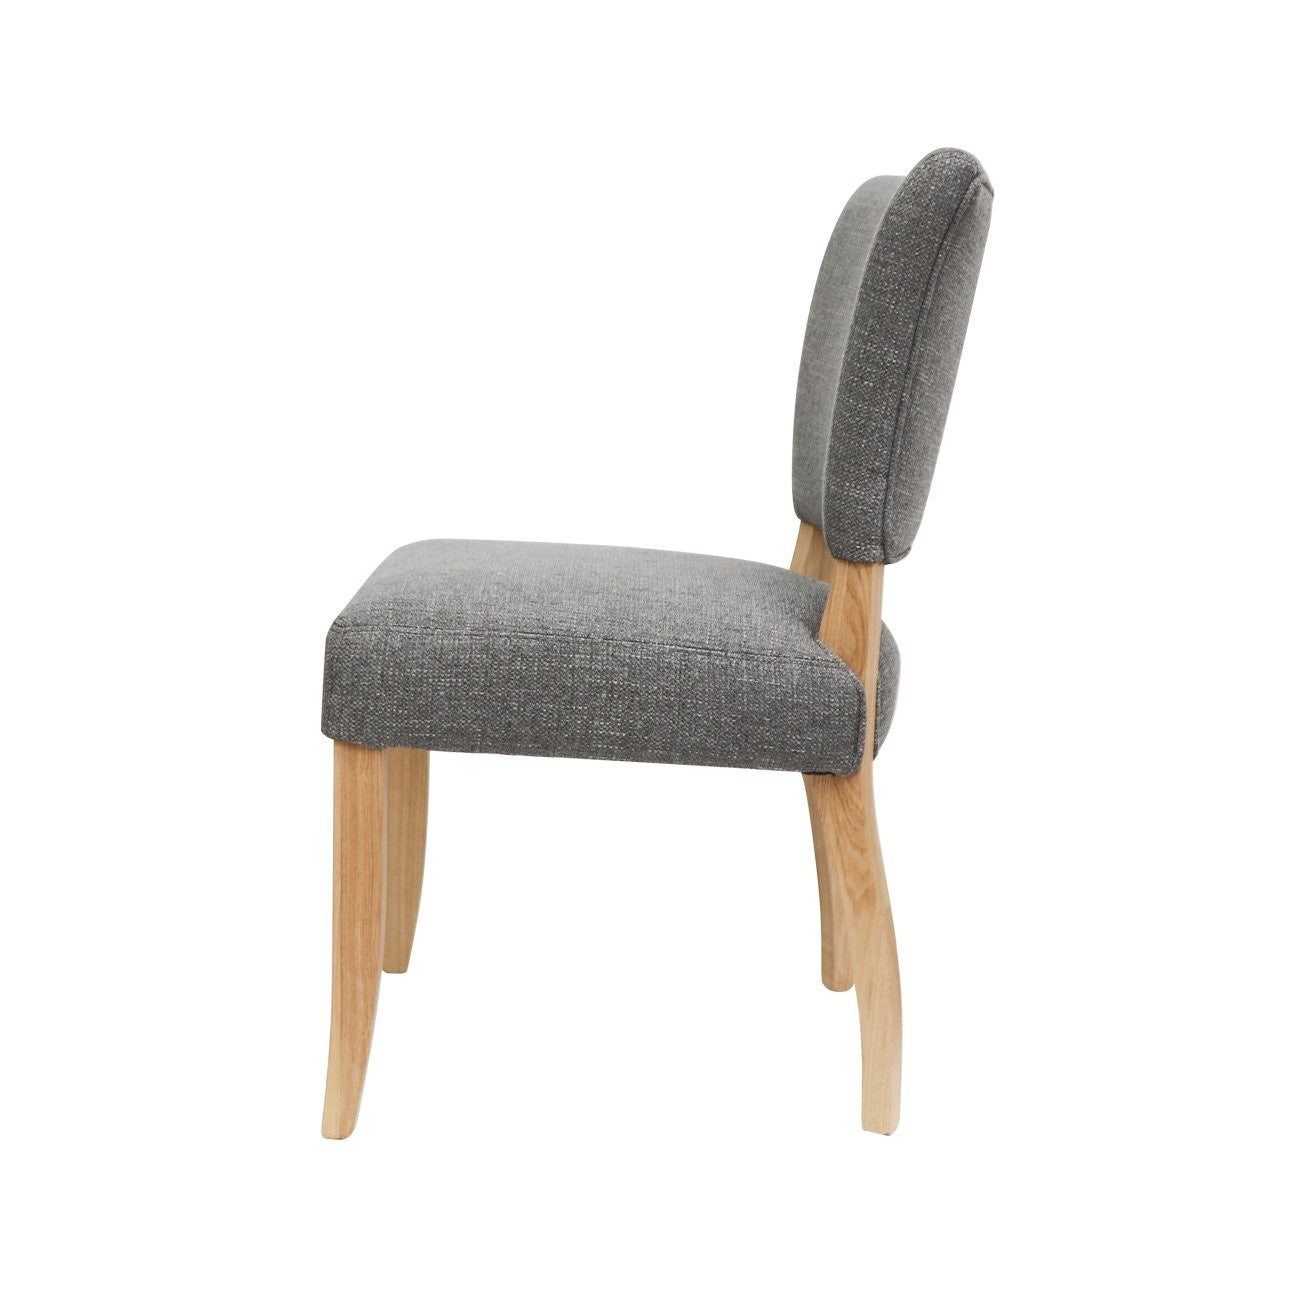 Chelsea Fabric Dining Chair - Grey